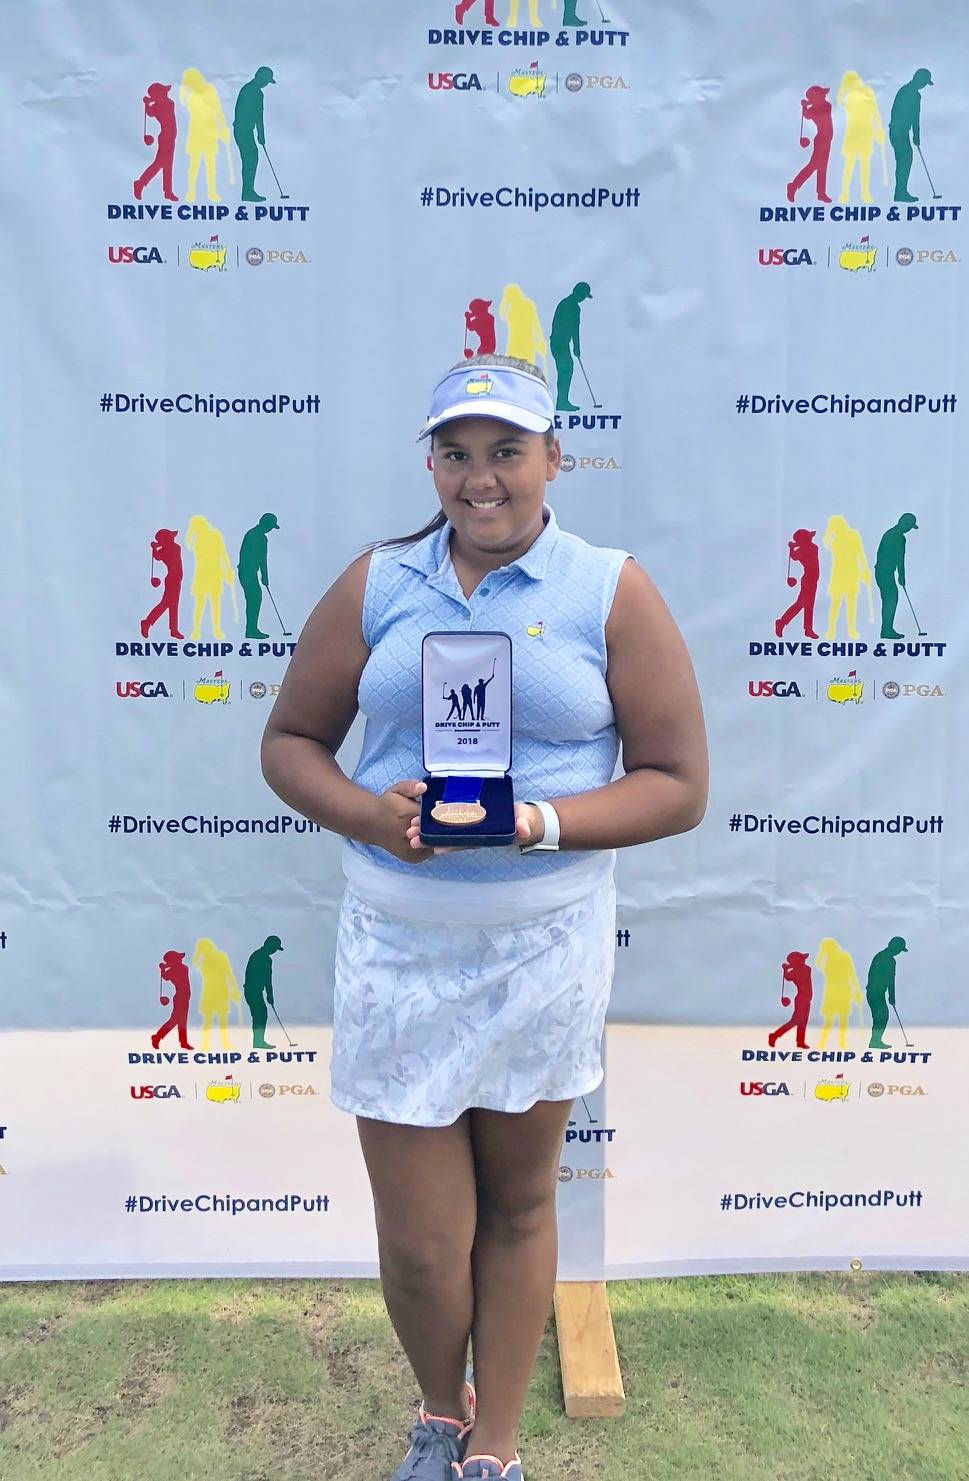 Mount Si High freshman Kasey Maralack won the recent Drive Chip and Putt Regional Championship. Courtesy of the Maralack family